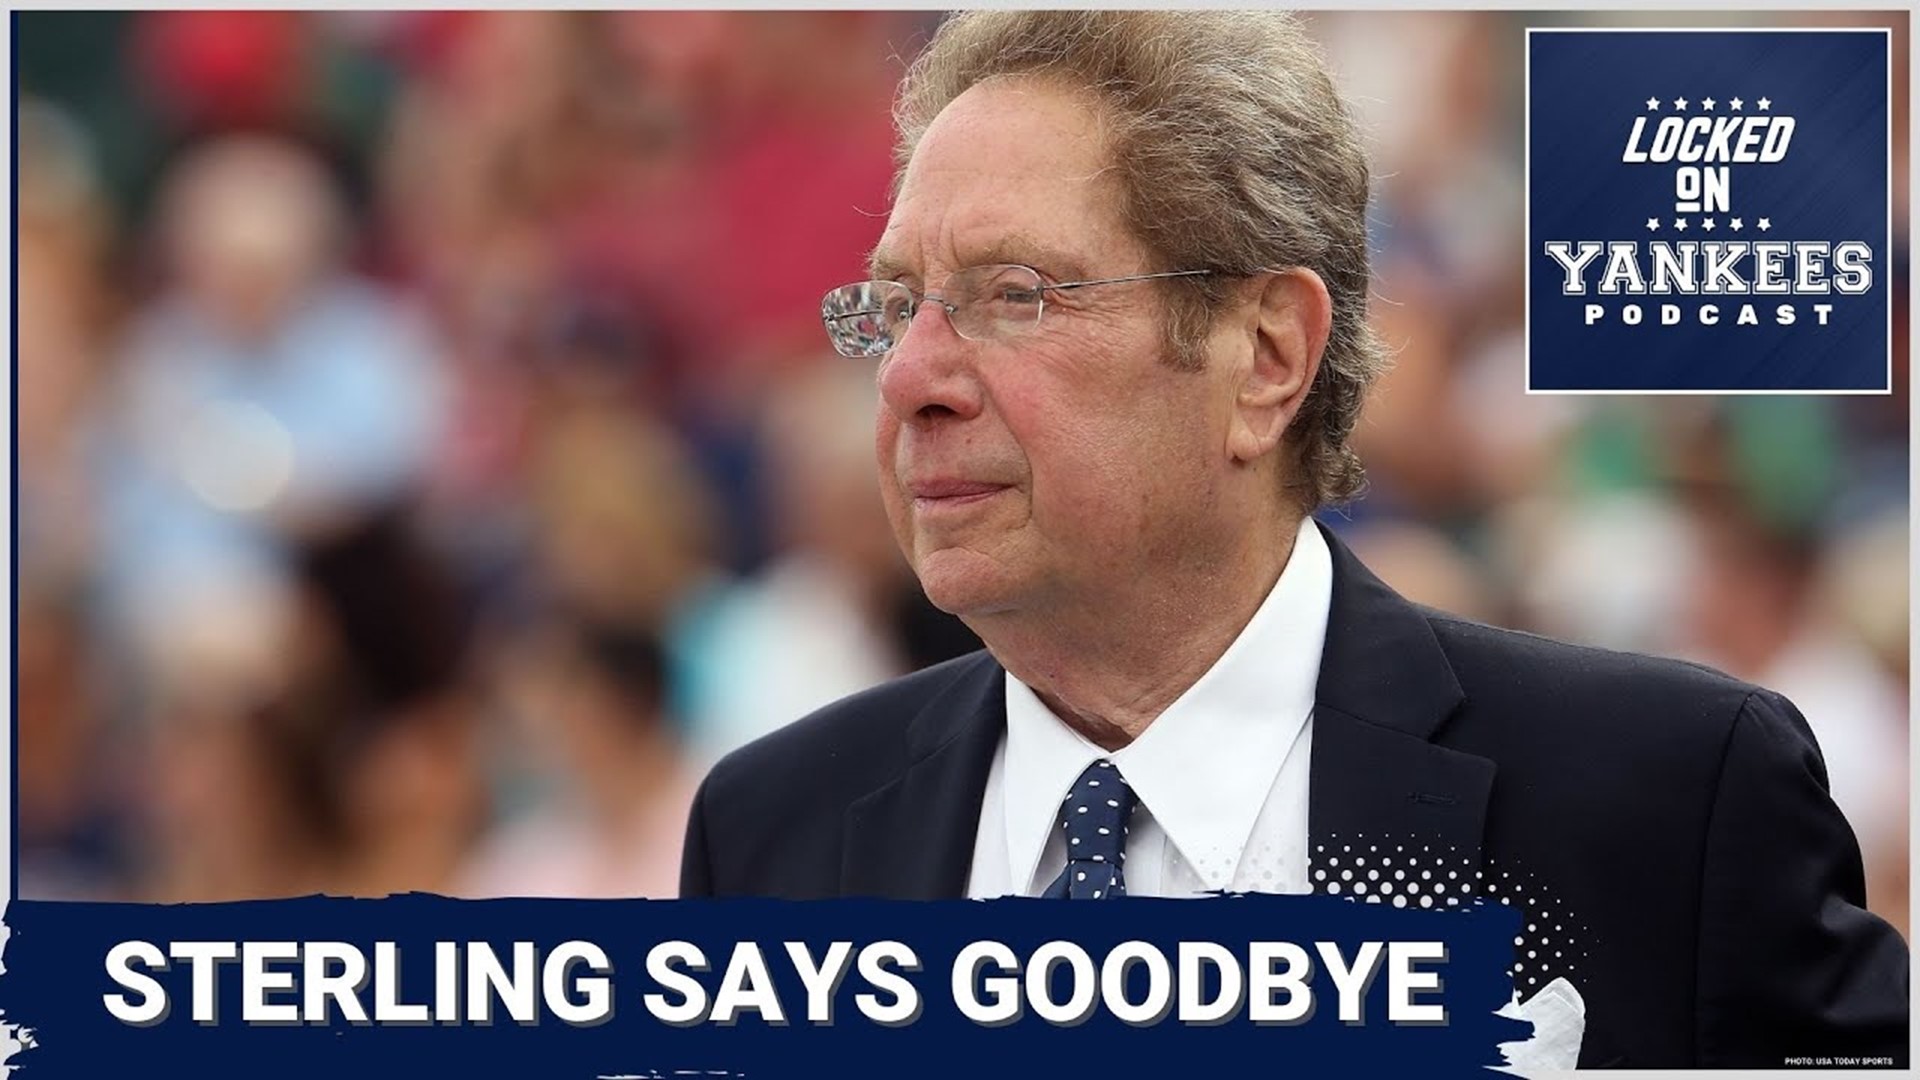 The New York Yankees are losing their long-time radio announcer John Sterling who has retired effective immediately.